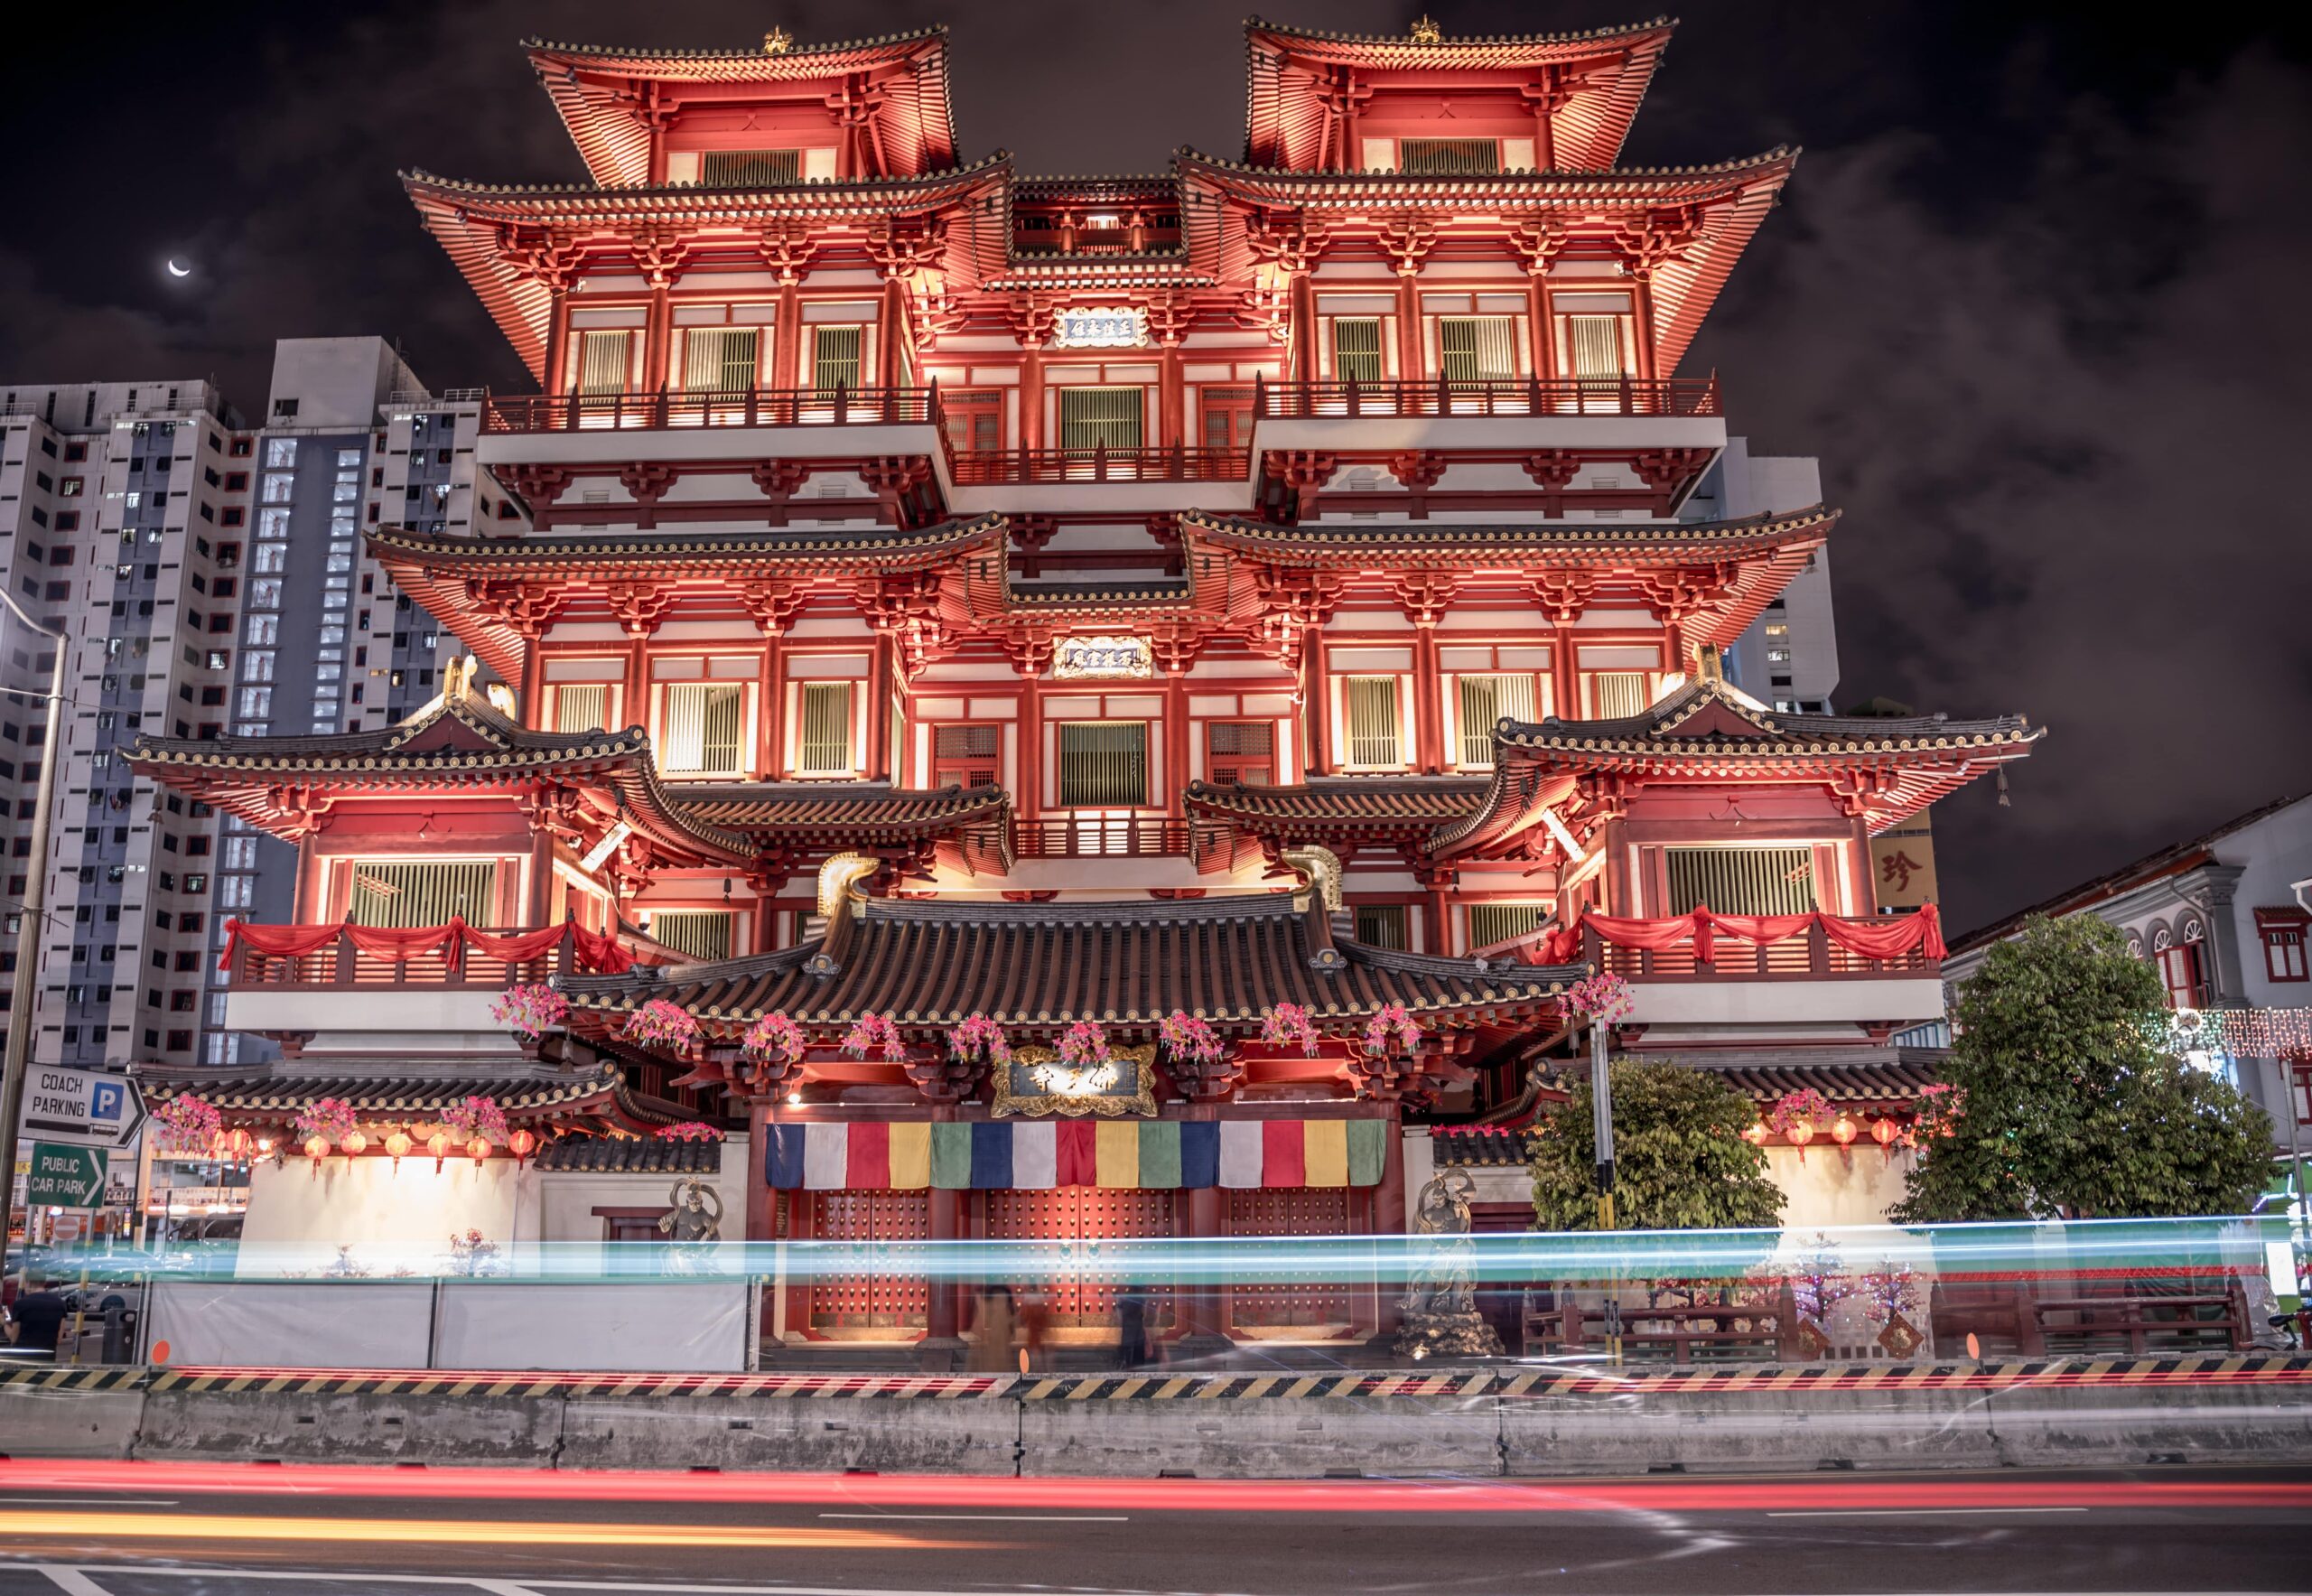 Things to do in Singapore - Chinatown